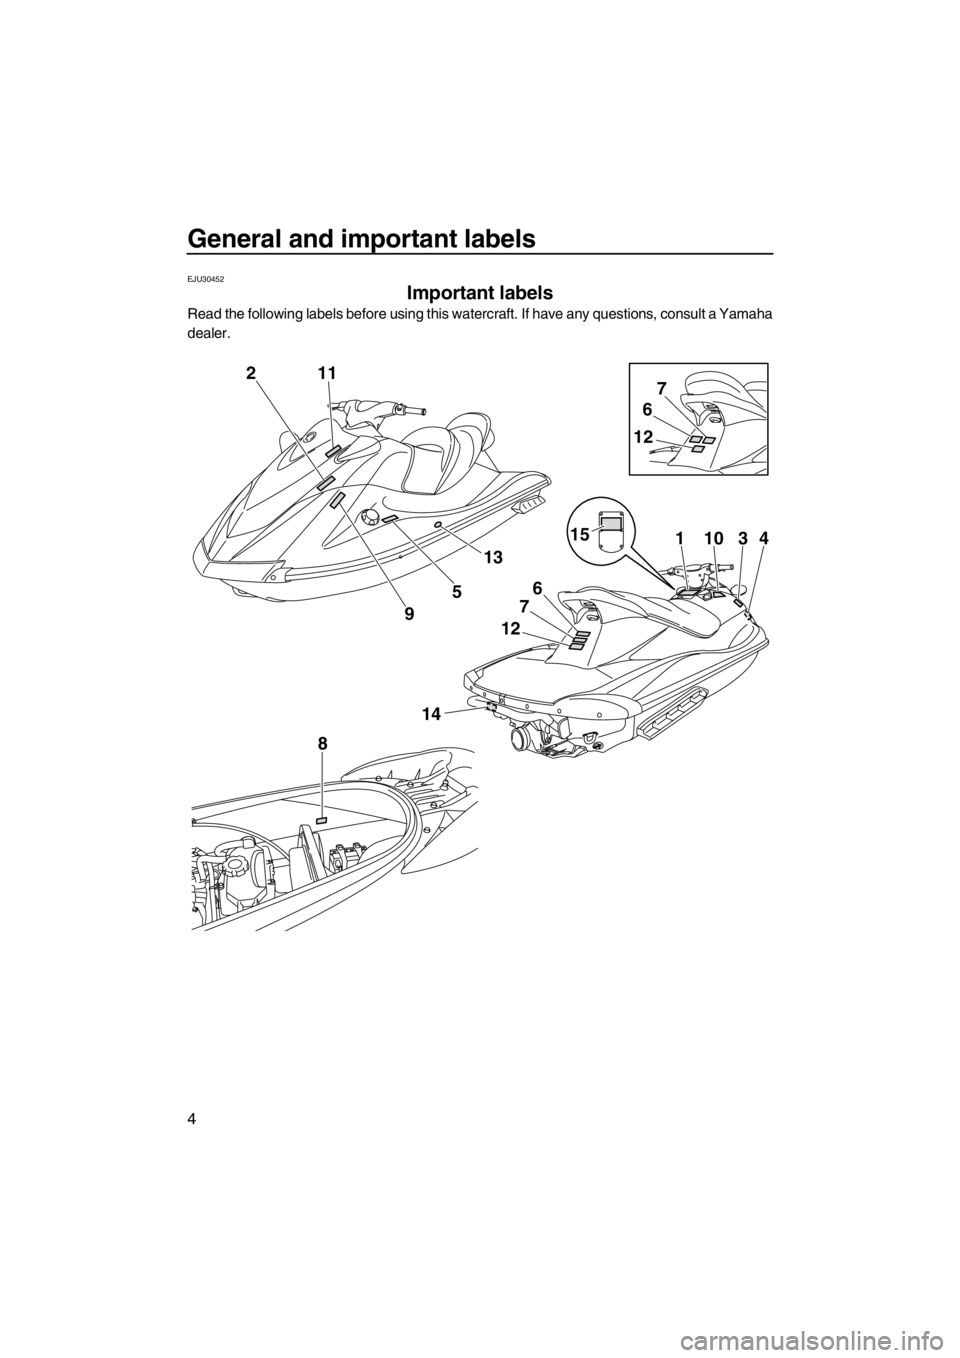 YAMAHA VX 2013  Owners Manual General and important labels
4
EJU30452
Important labels 
Read the following labels before using this watercraft. If have any questions, consult a Yamaha
dealer.
2
14
8
12
6
7
15
6
7
12
11034
11
9
5
1